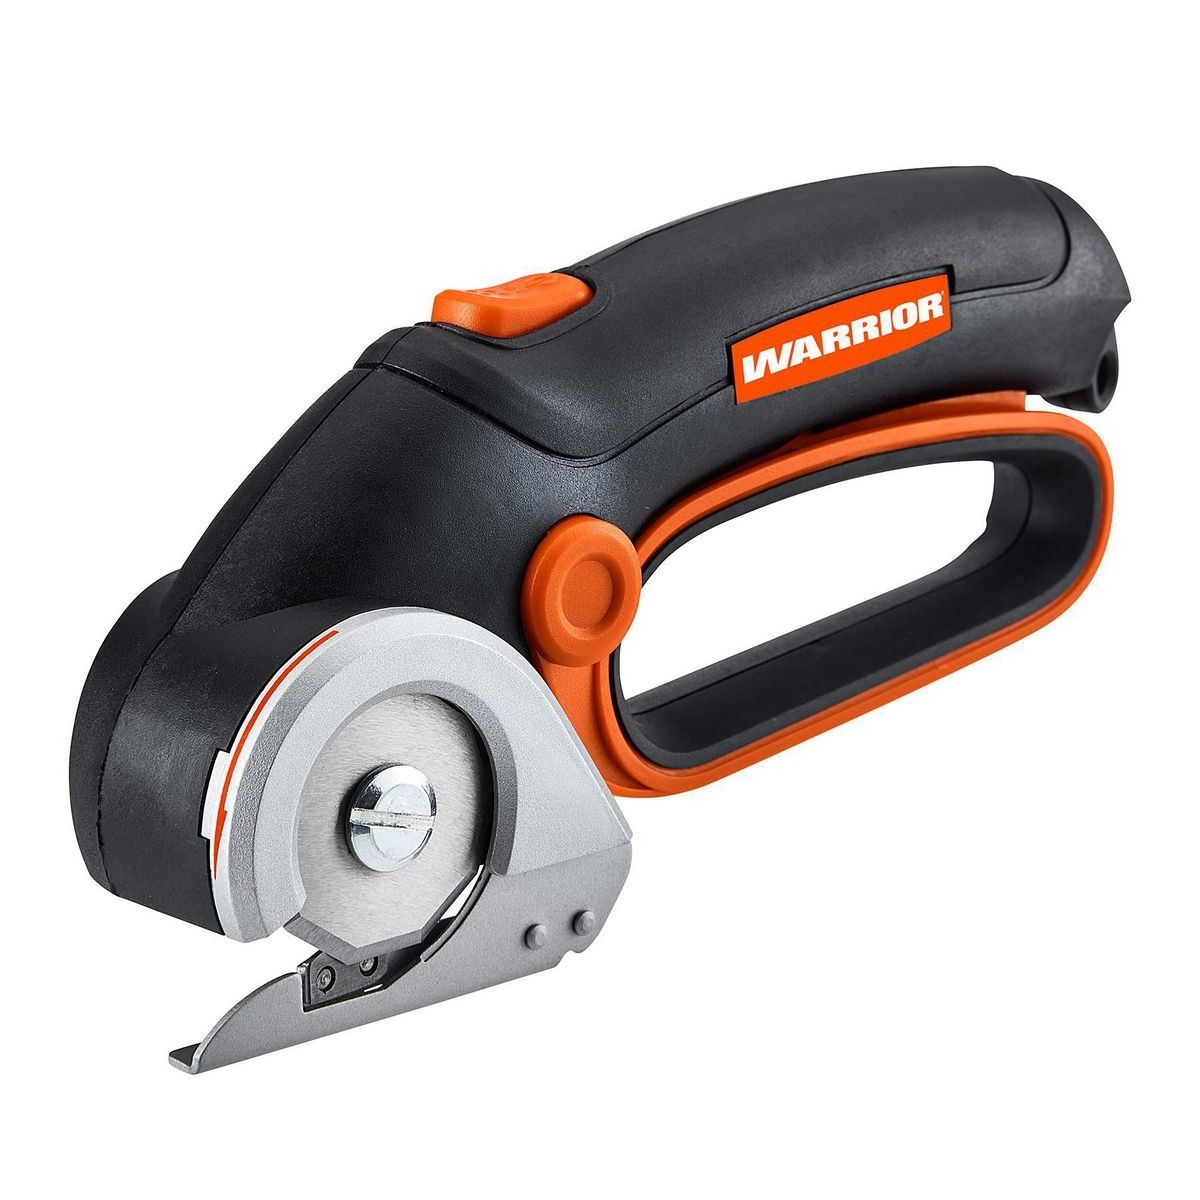 WARRIOR 4v Lithium-Ion Cordless Power Cutter – Item 56192